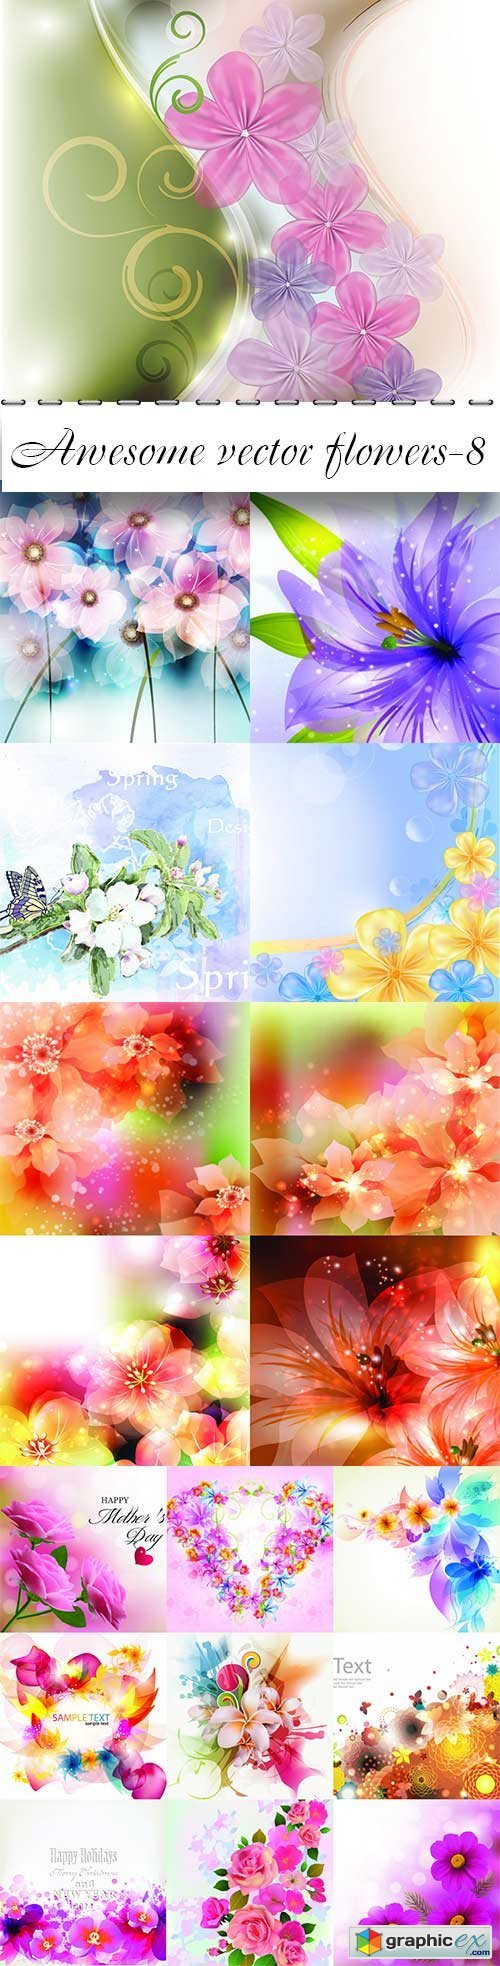 Awesome vector flowers-8